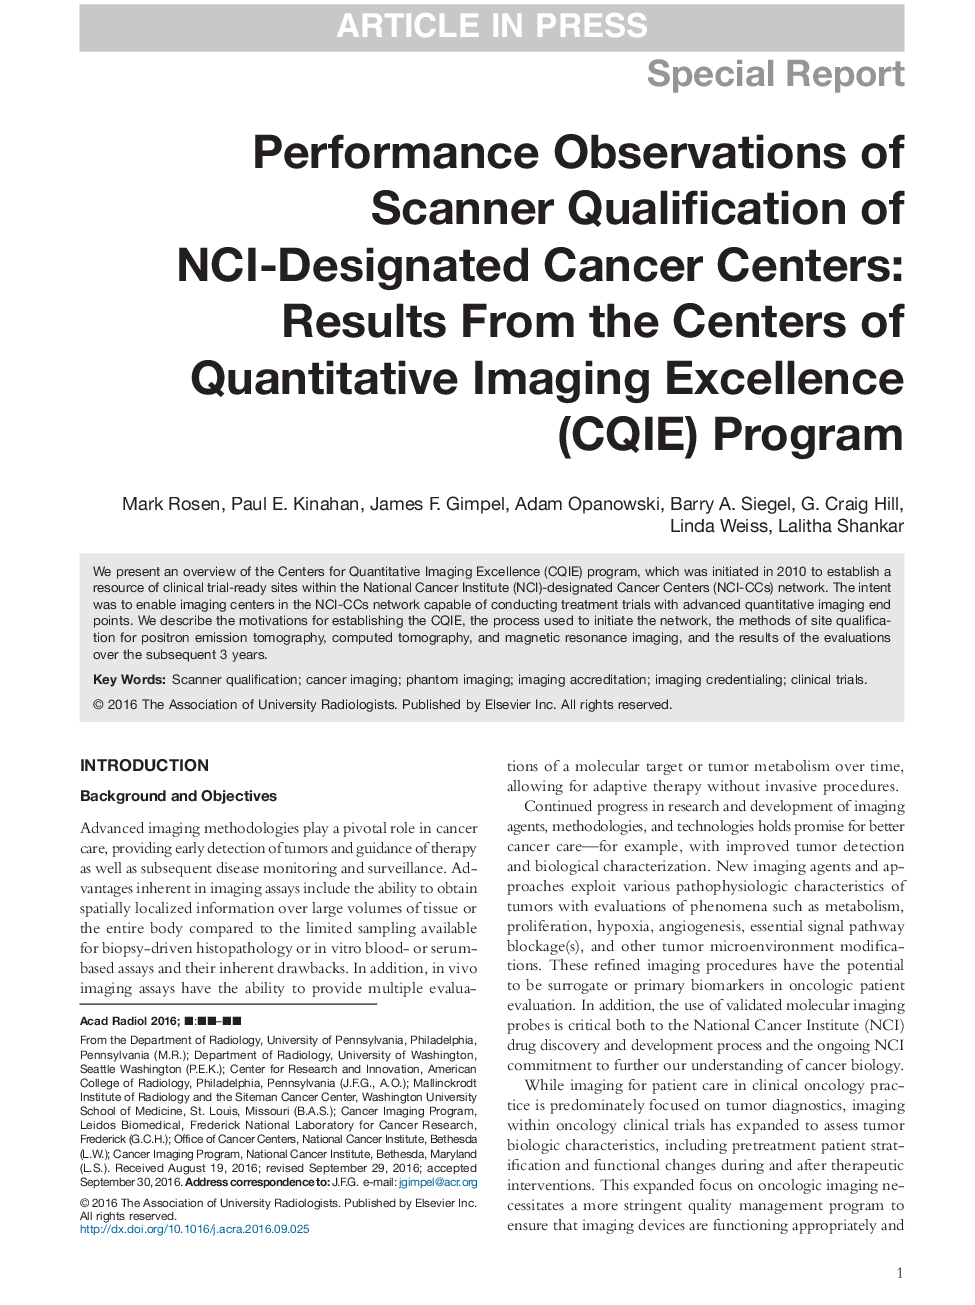 Performance Observations of Scanner Qualification of NCI-Designated Cancer Centers: Results From the Centers of Quantitative Imaging Excellence (CQIE) Program